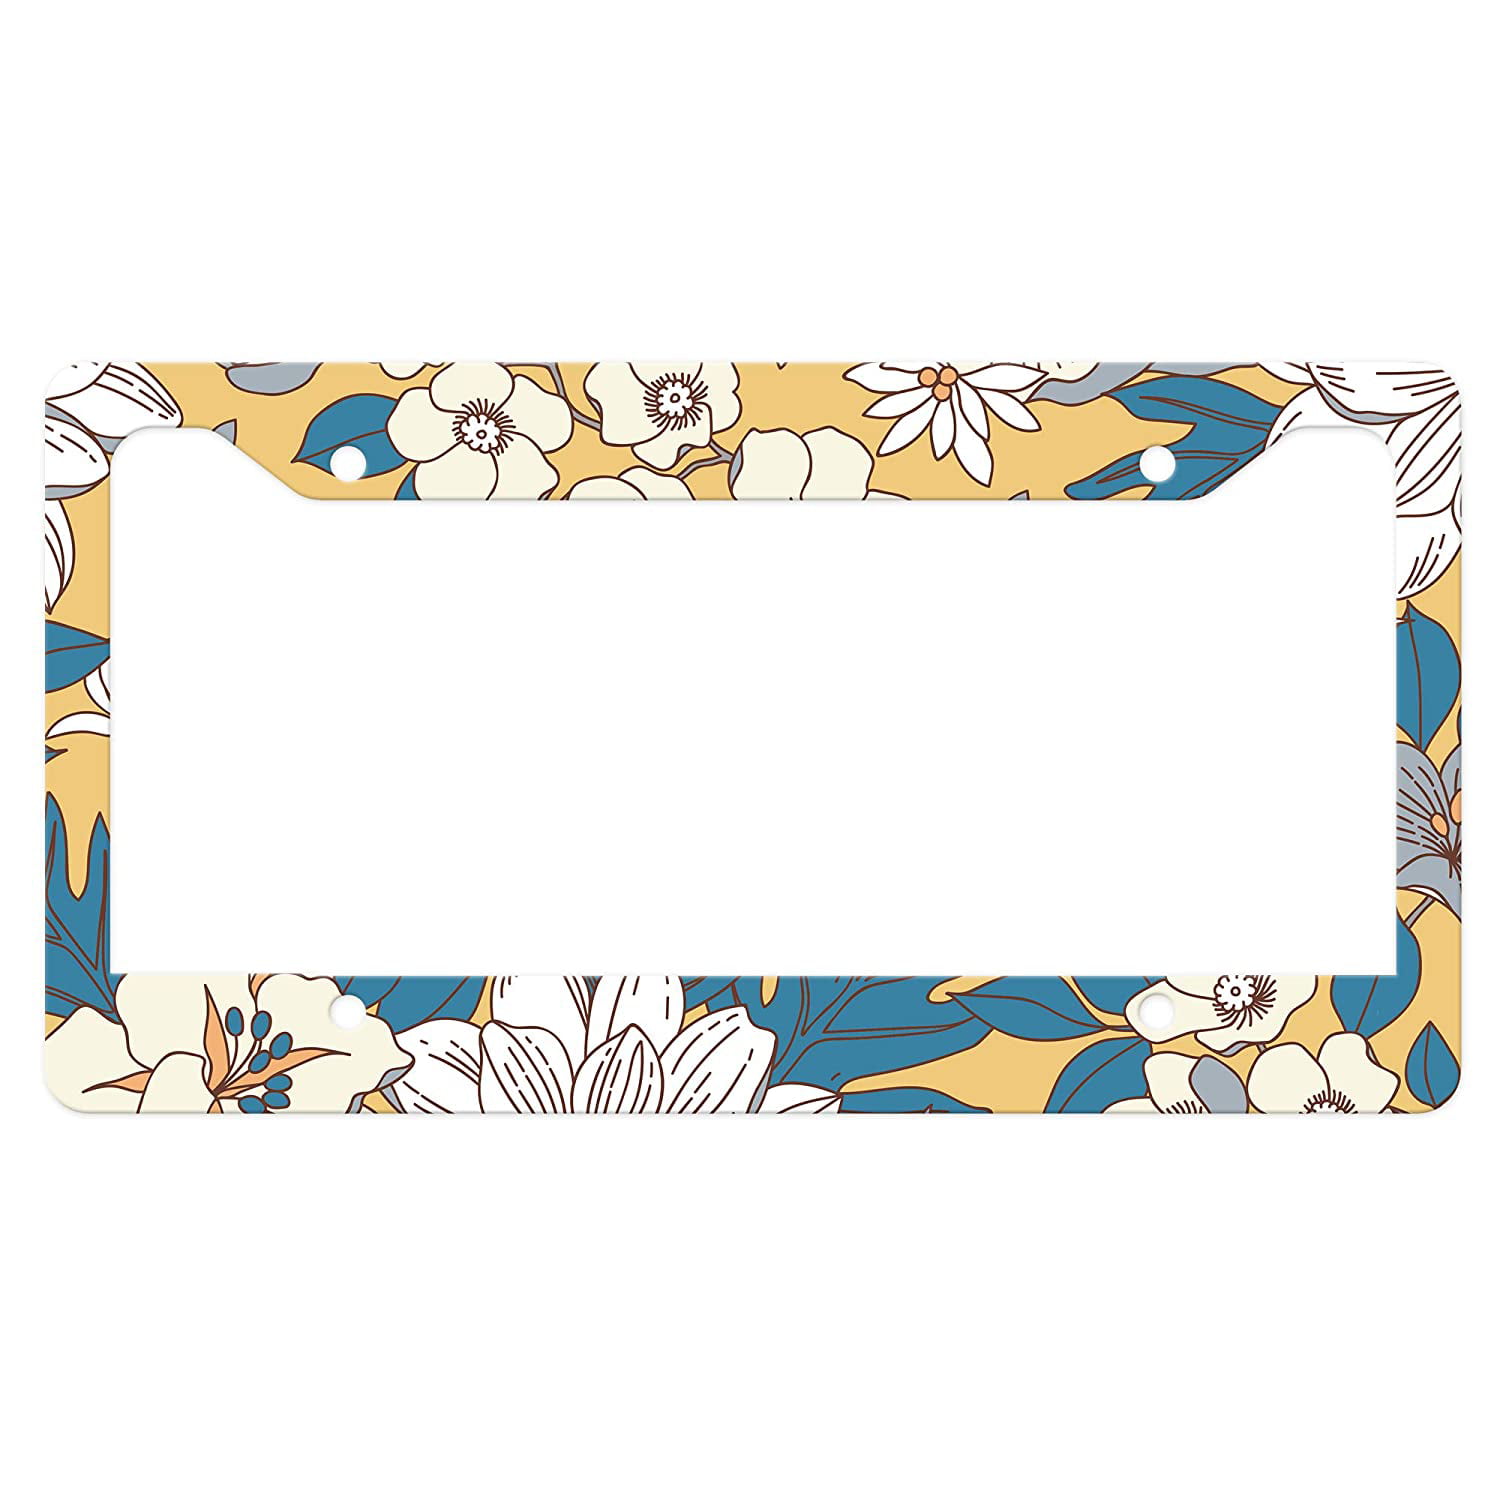 Flower and Leaves License Plate Frame 